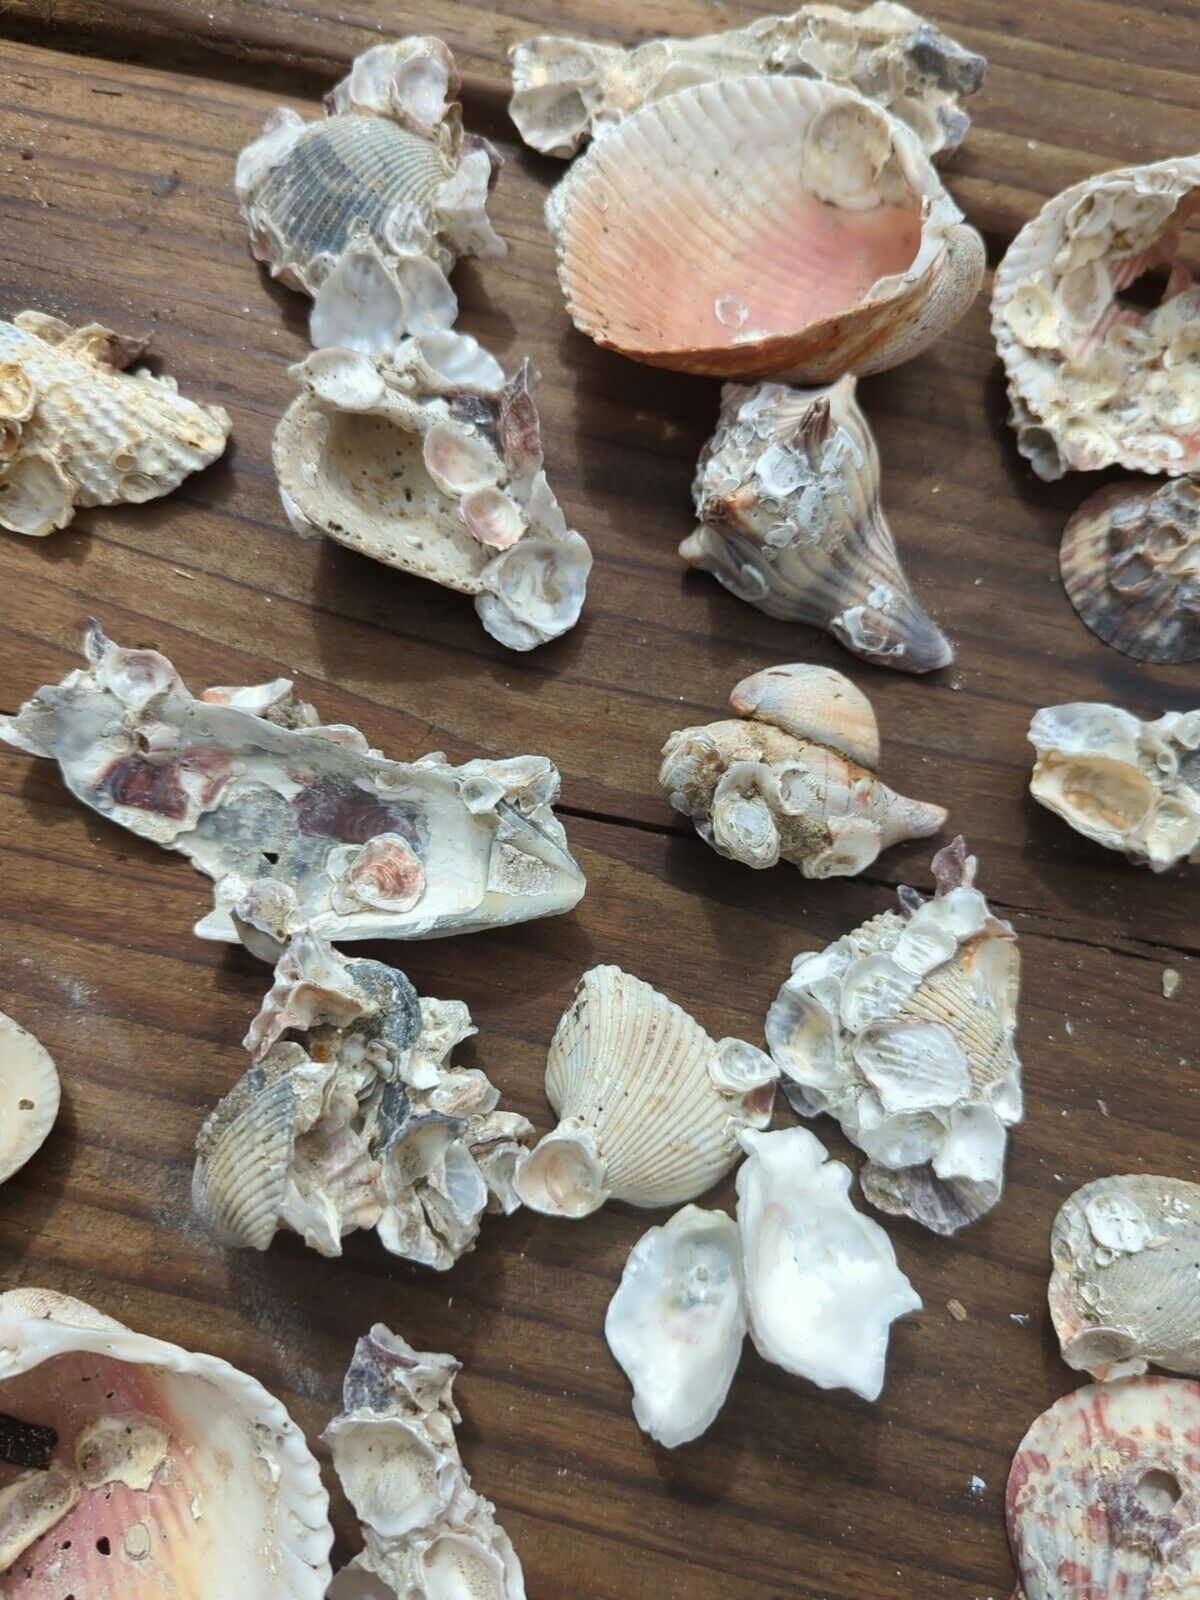 36 pc. Oyster  Scallop Barnacle Welk Cluster Shell Aquarium Decoration Nautical